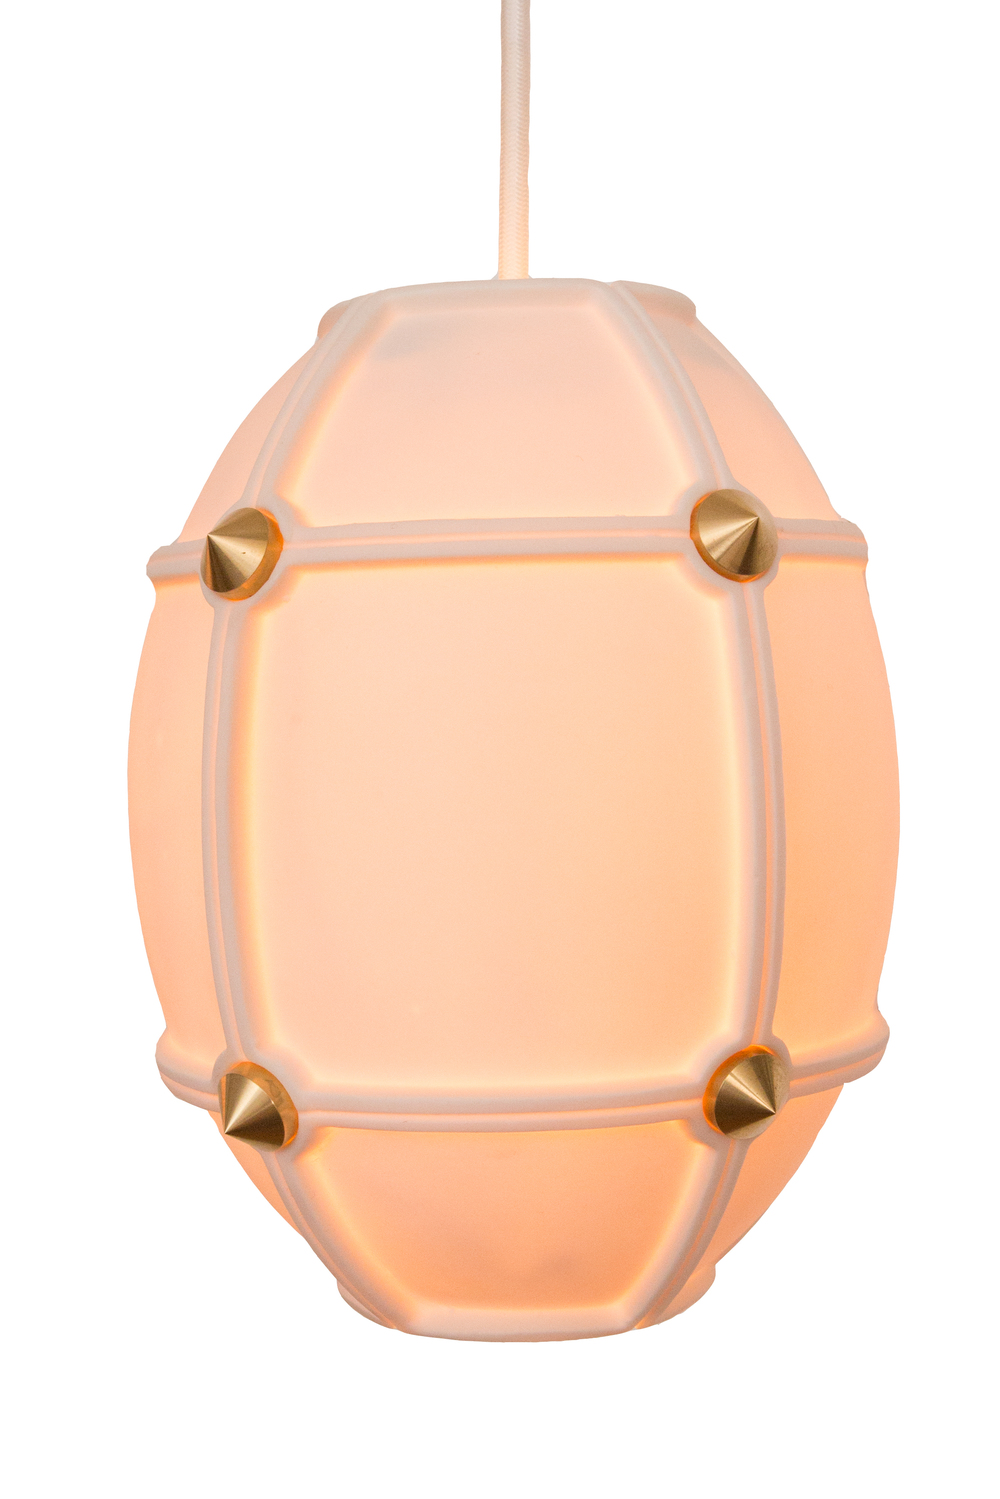 The Fusnate Blanc Pendant by Matthew Shively